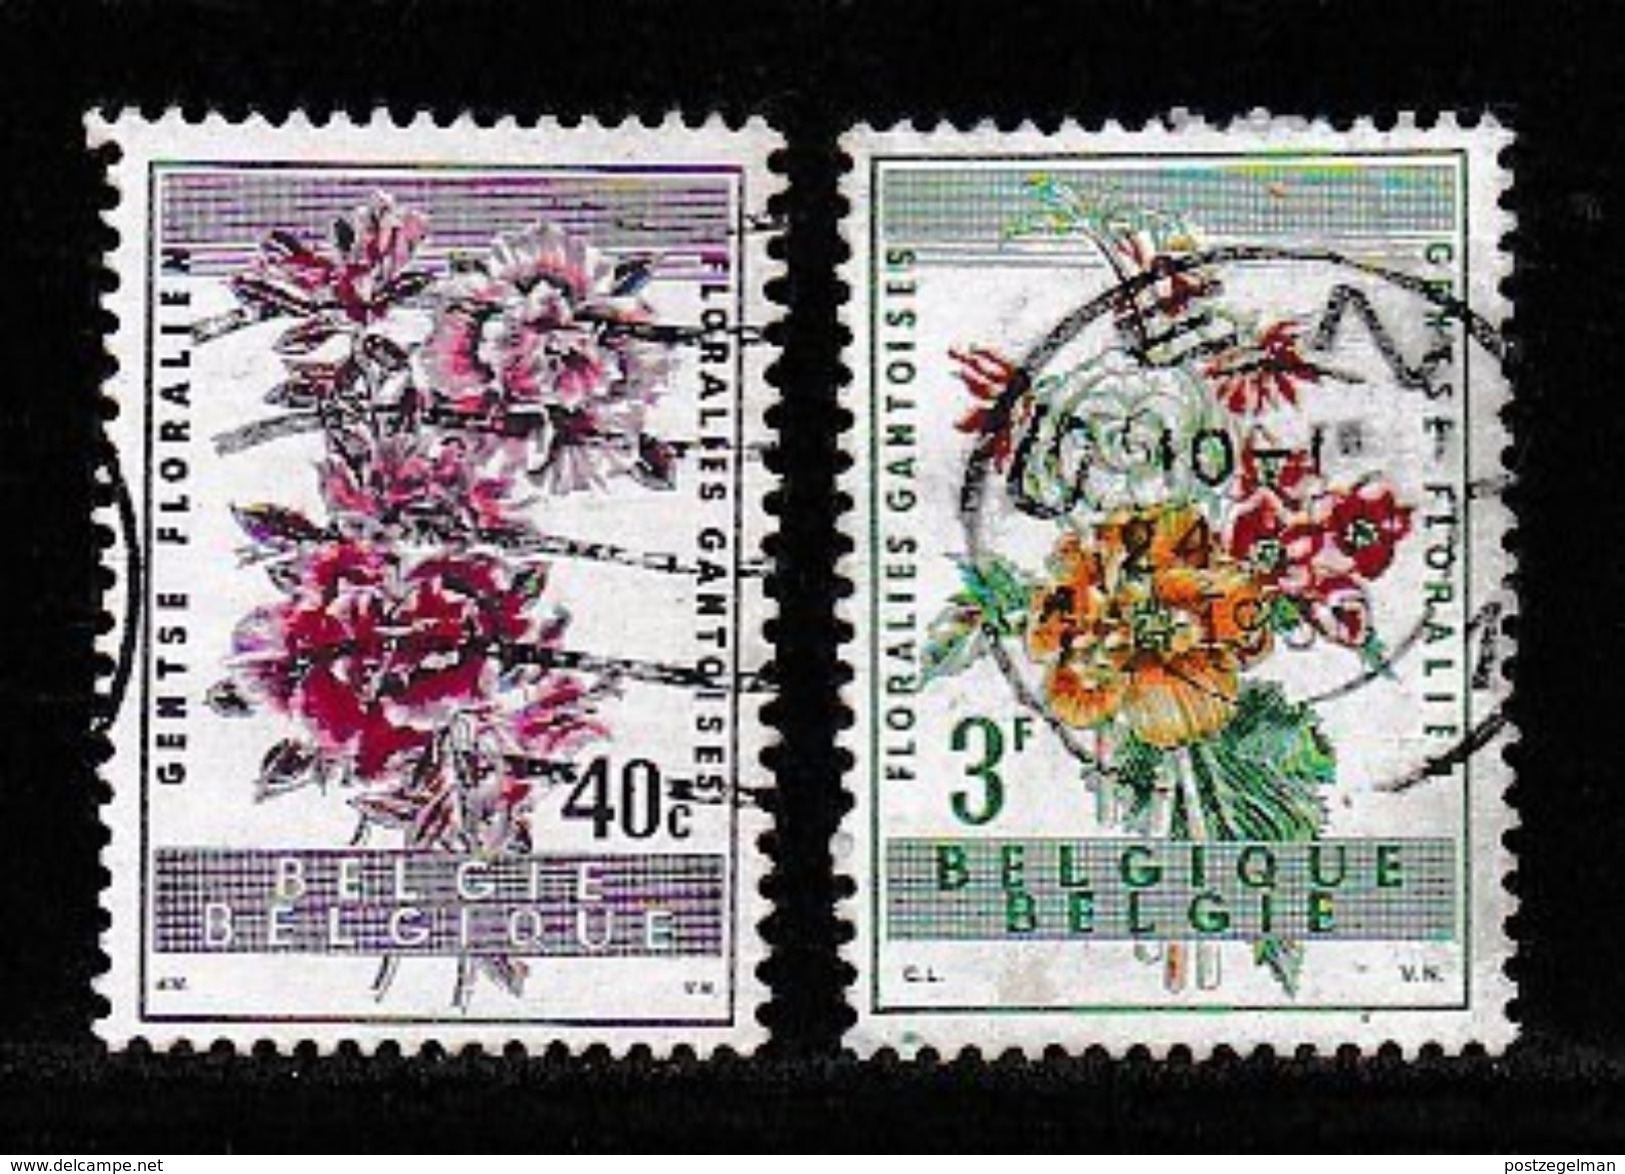 BELGIUM, 1960, Used Stamp(s), Flower Show,   MI 1179-1181, #10364, 2 Values Only - Used Stamps